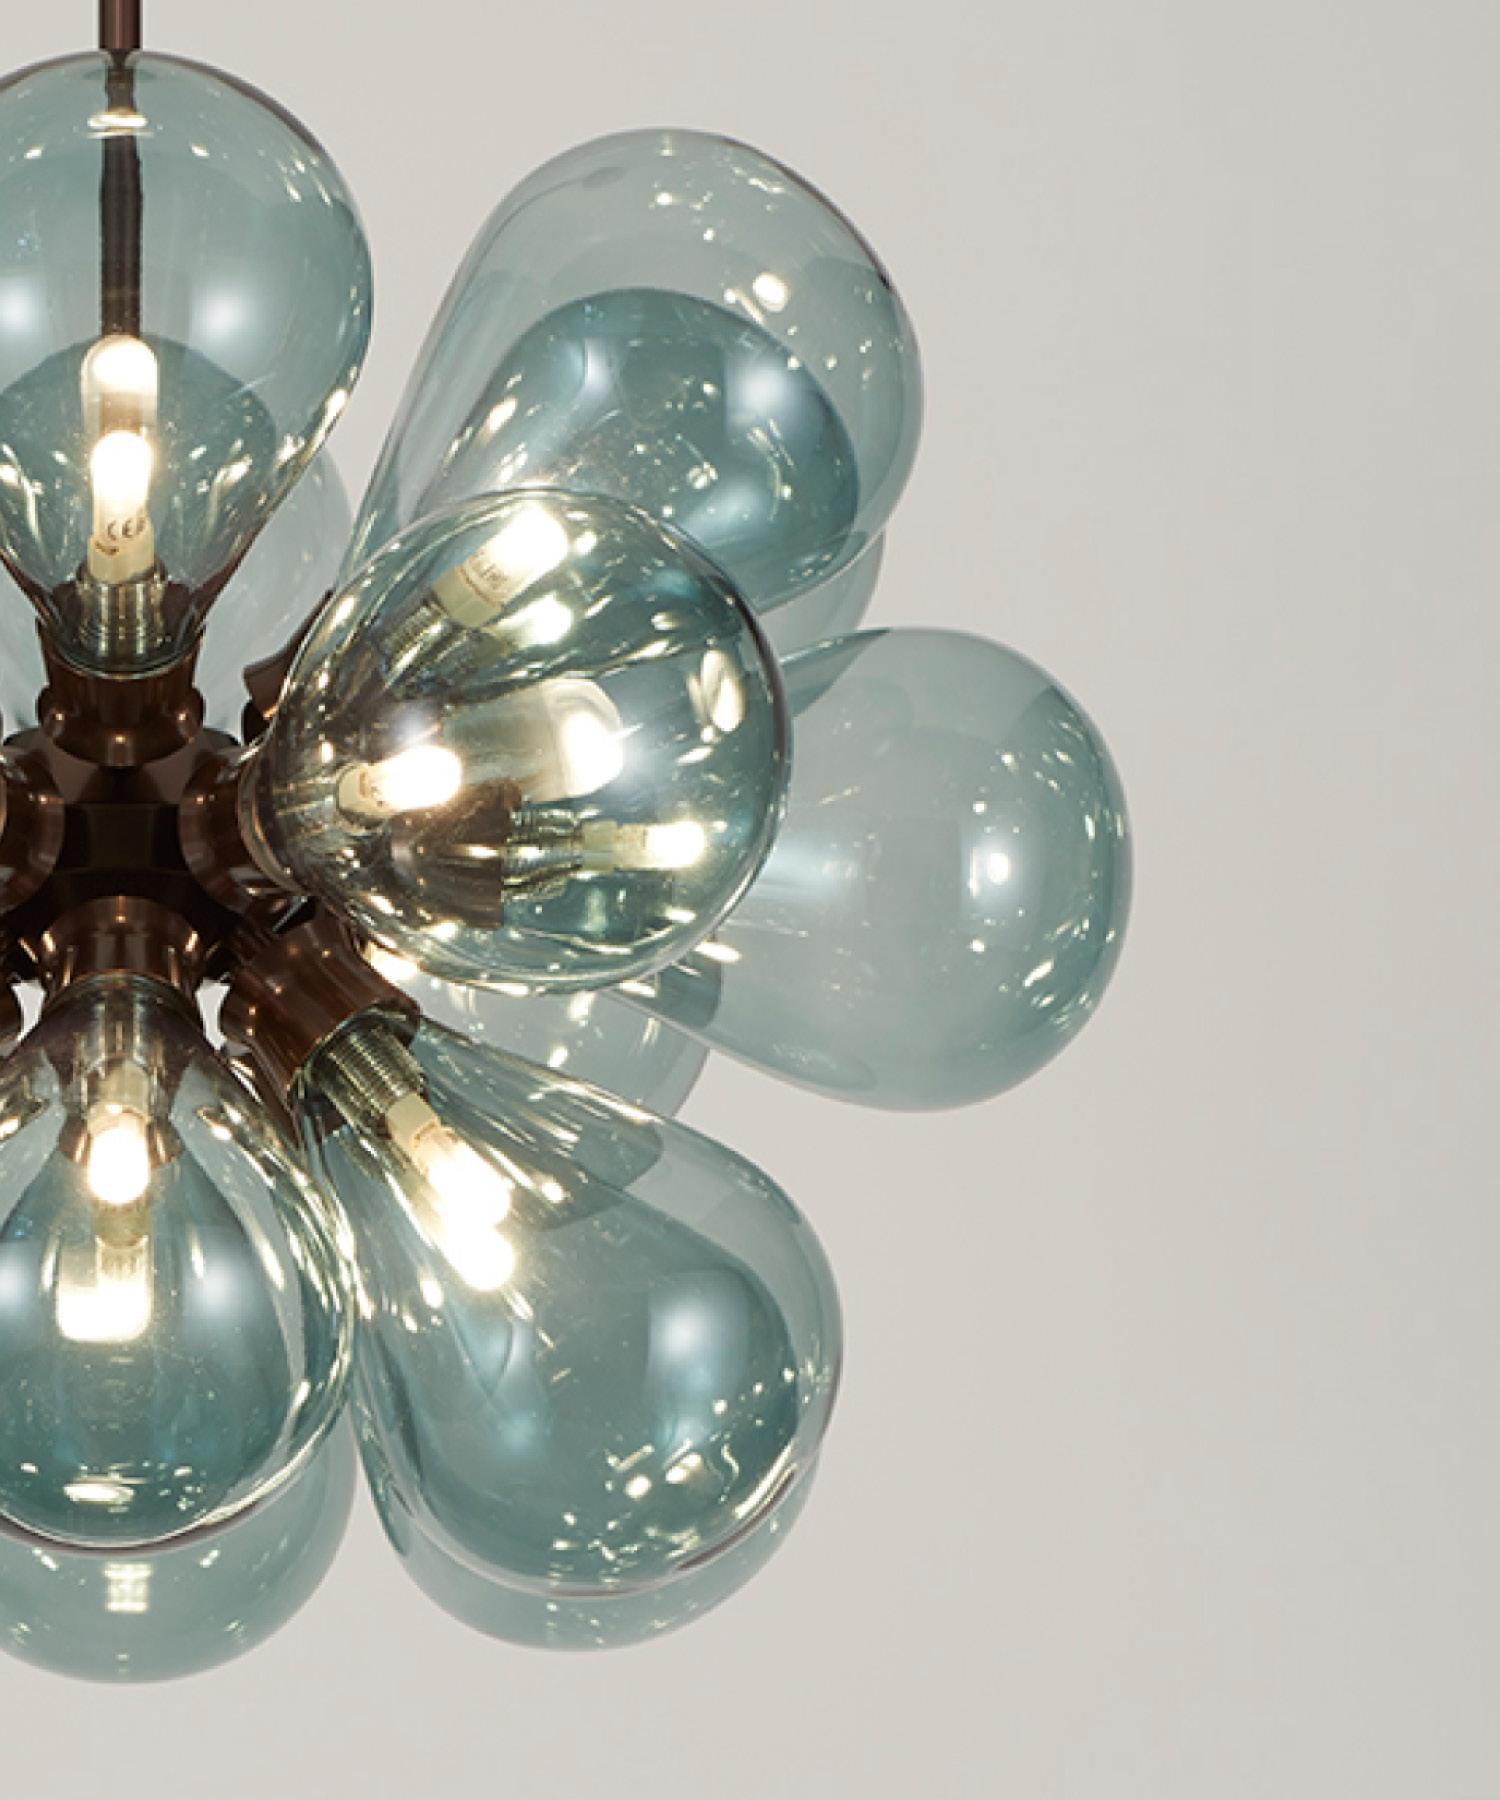 Cintola Maxi Pendant in Satin Bronze with 18 Handblown Frosted Glass Globes For Sale 5